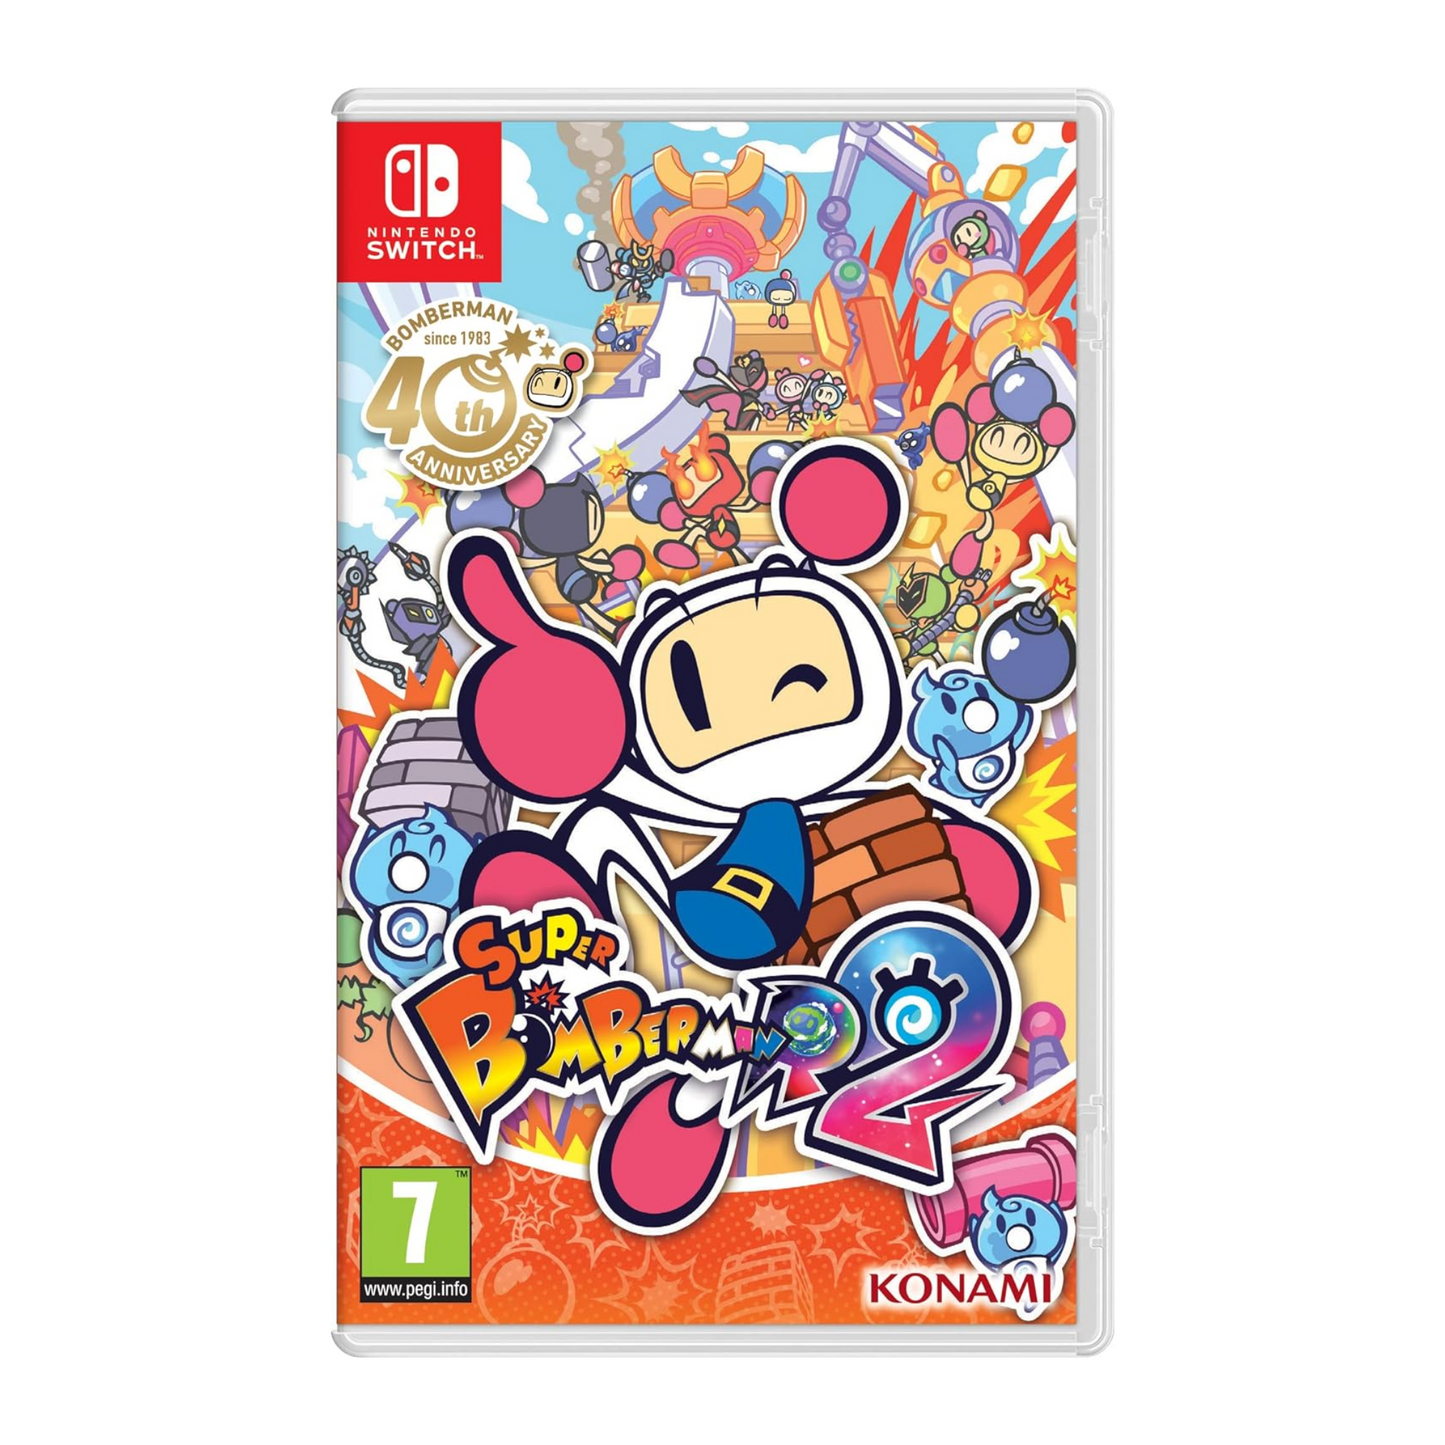 Super Bomberman R2 Video Game for Nintendo Switch